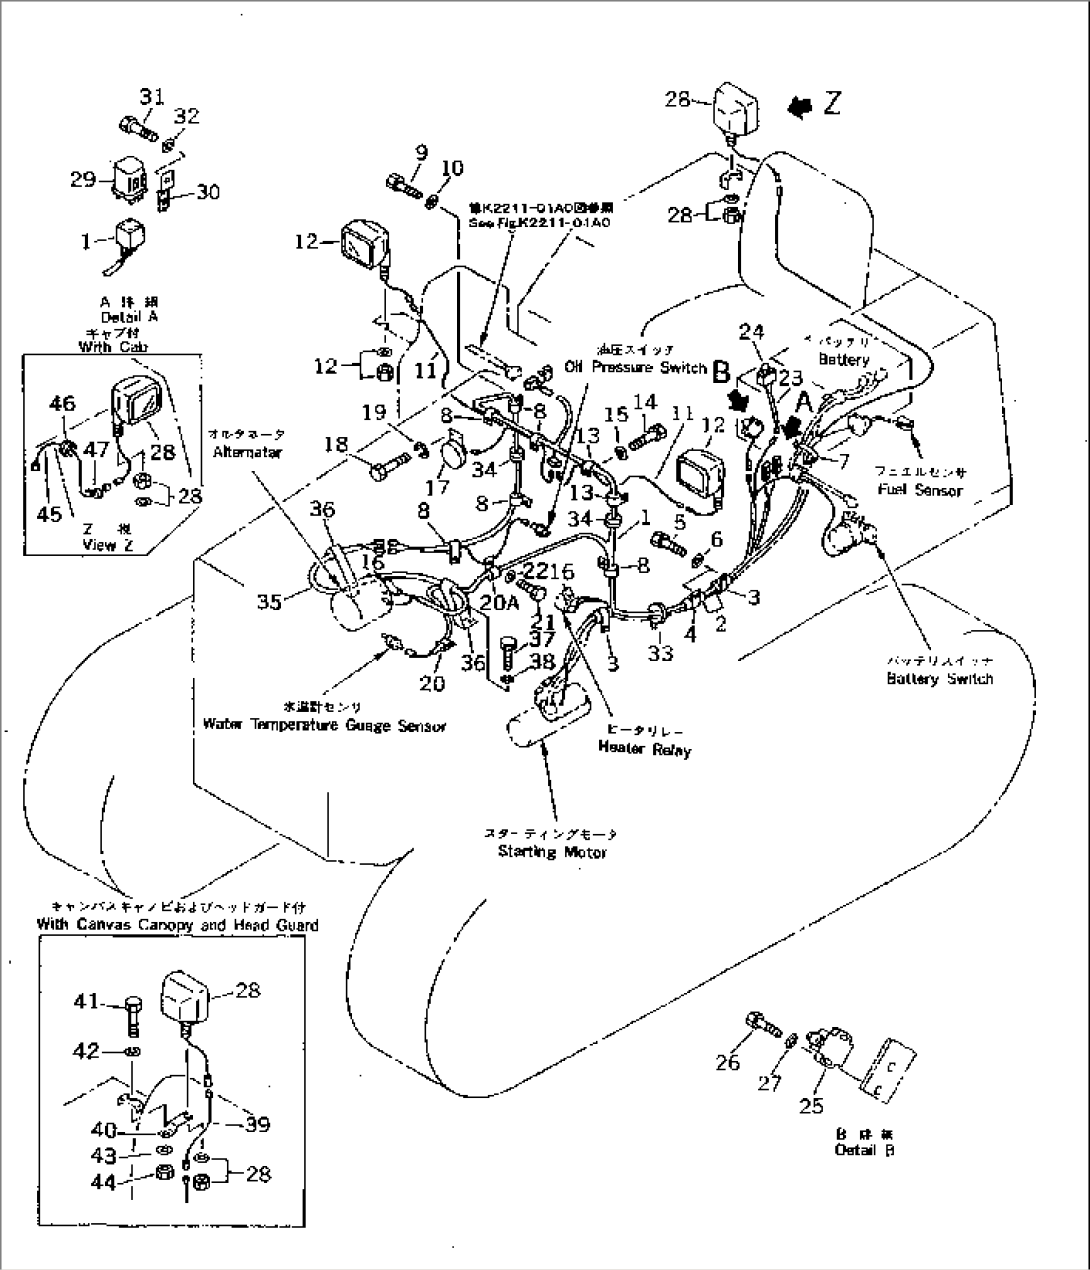 ELECTRICAL SYSTEM (2/2)(WITH ENGINE STOP MOTOR)(F/25A ALTERNATOR)(NOISE SUPPRESSION FOR EC)(#41001-41183)